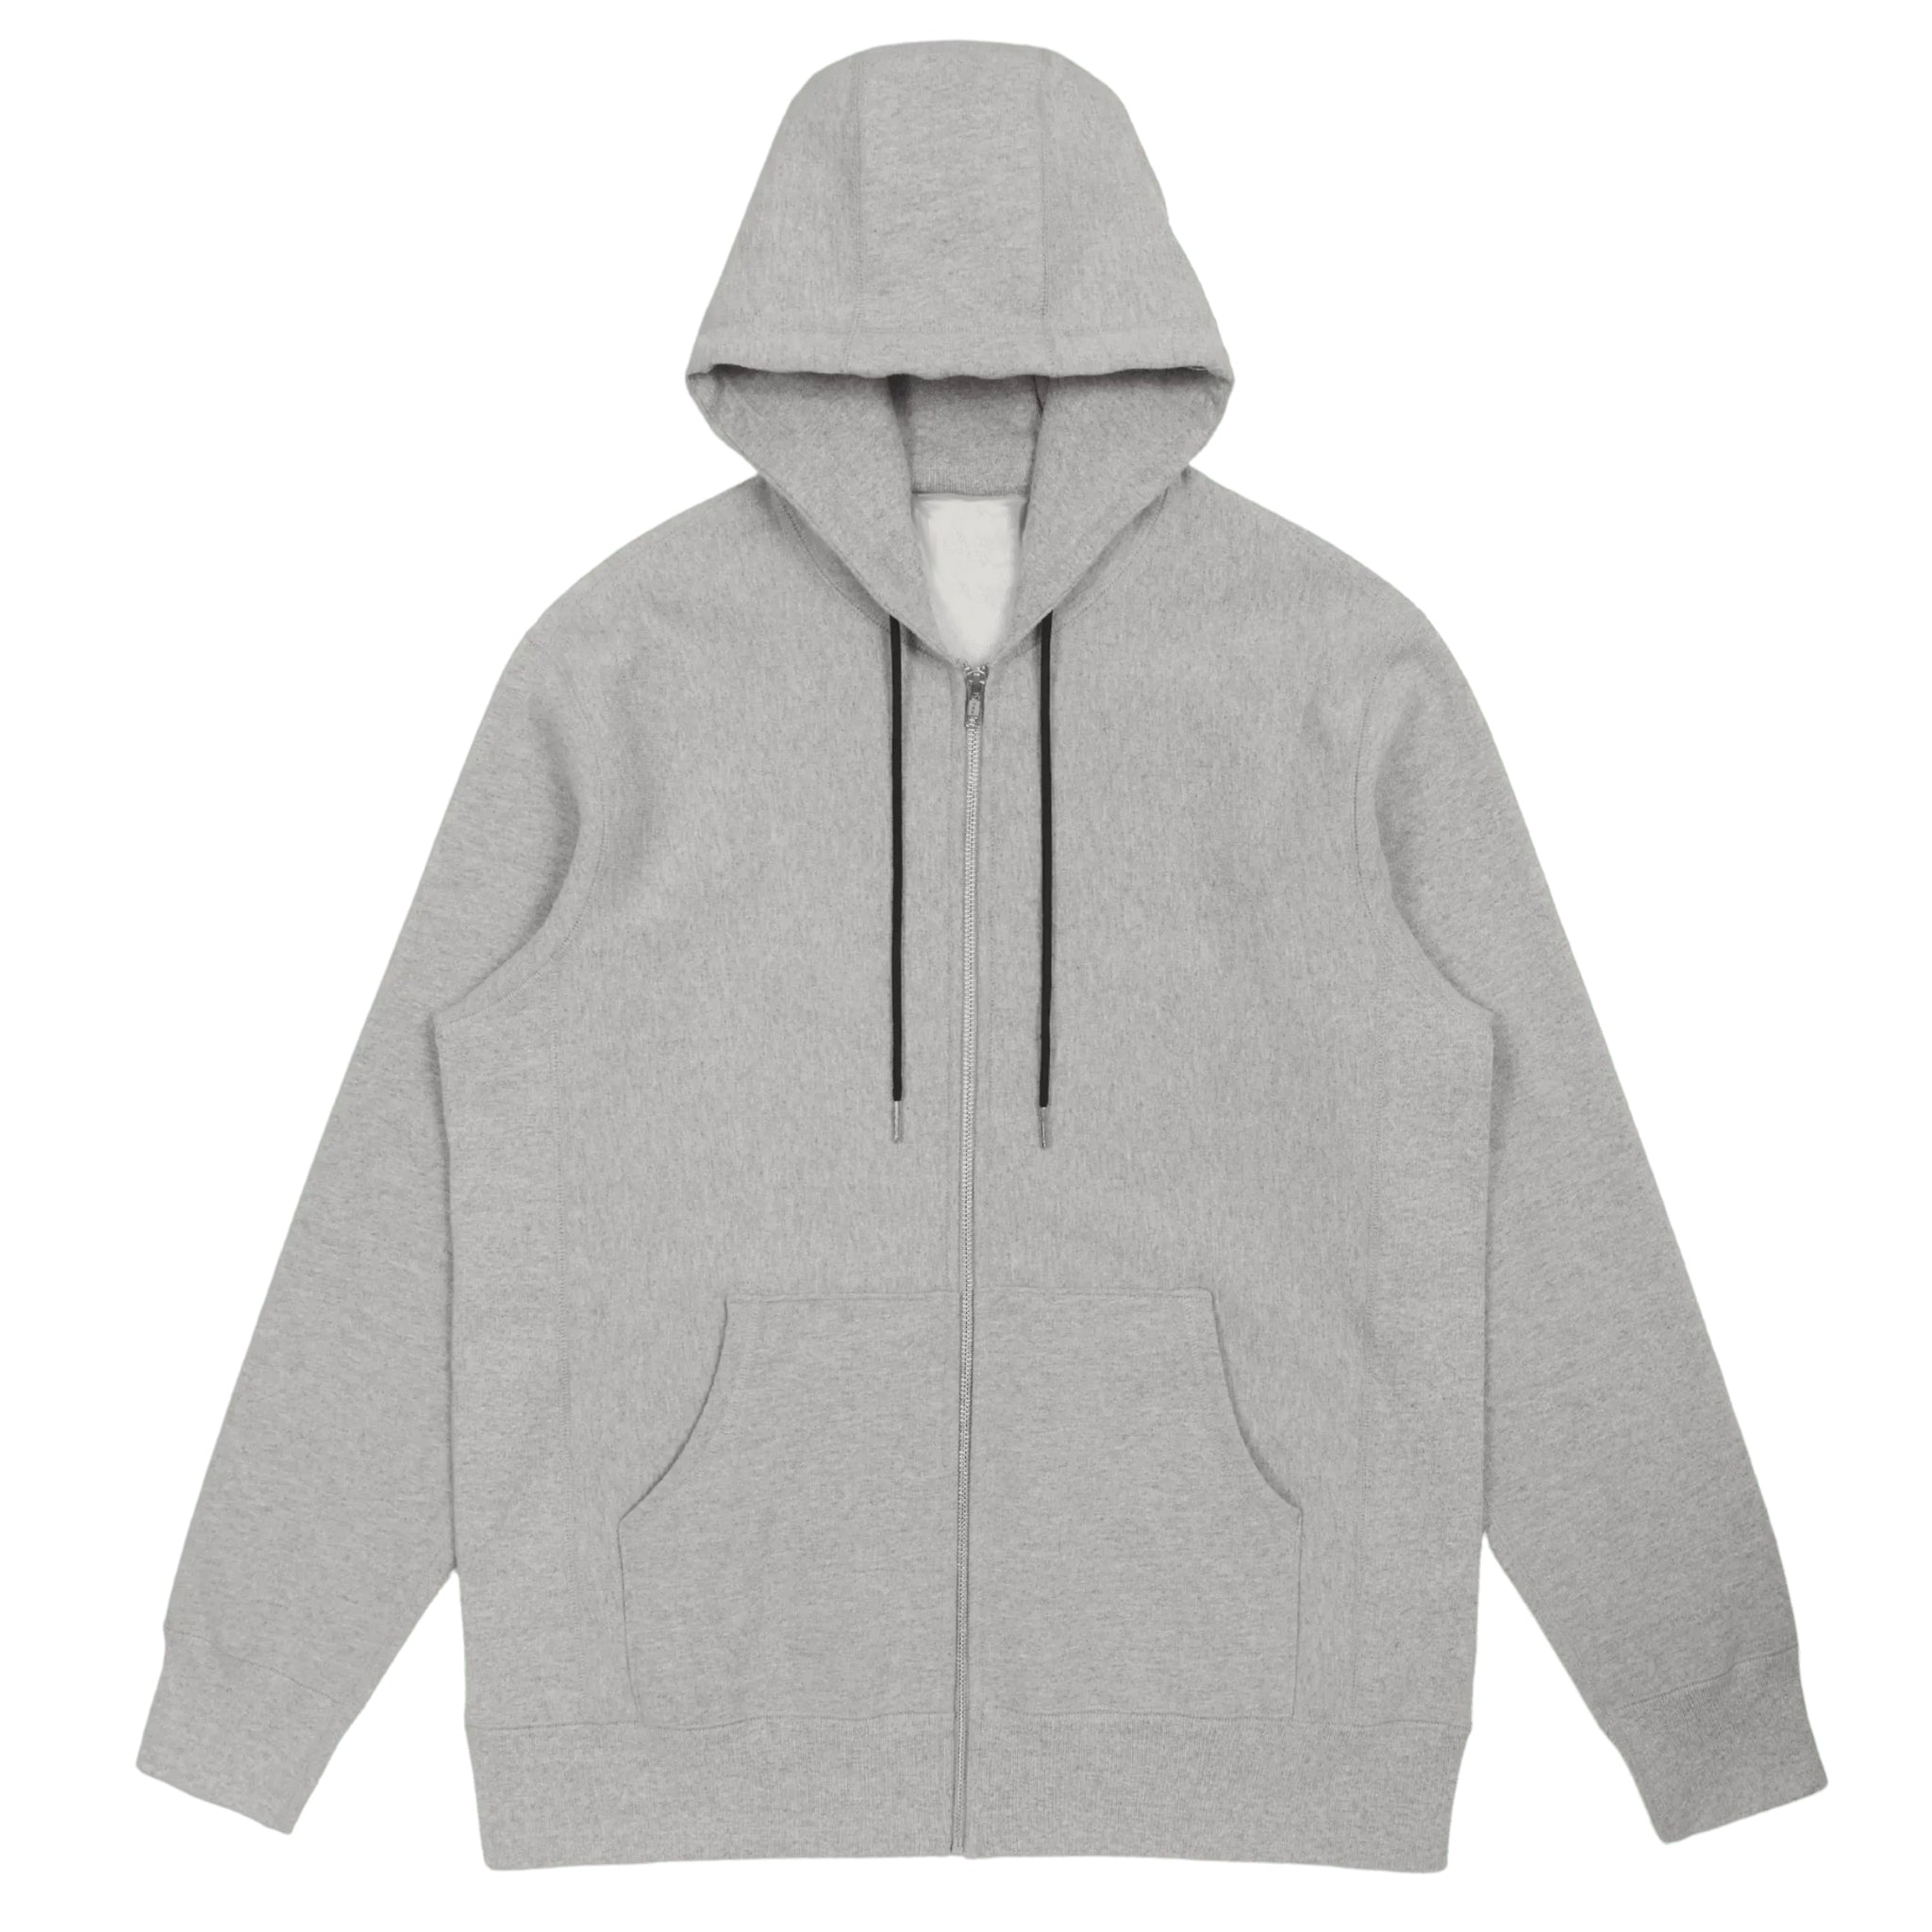 Front view of heavyweight zip hoodie in grey cotton on a white background